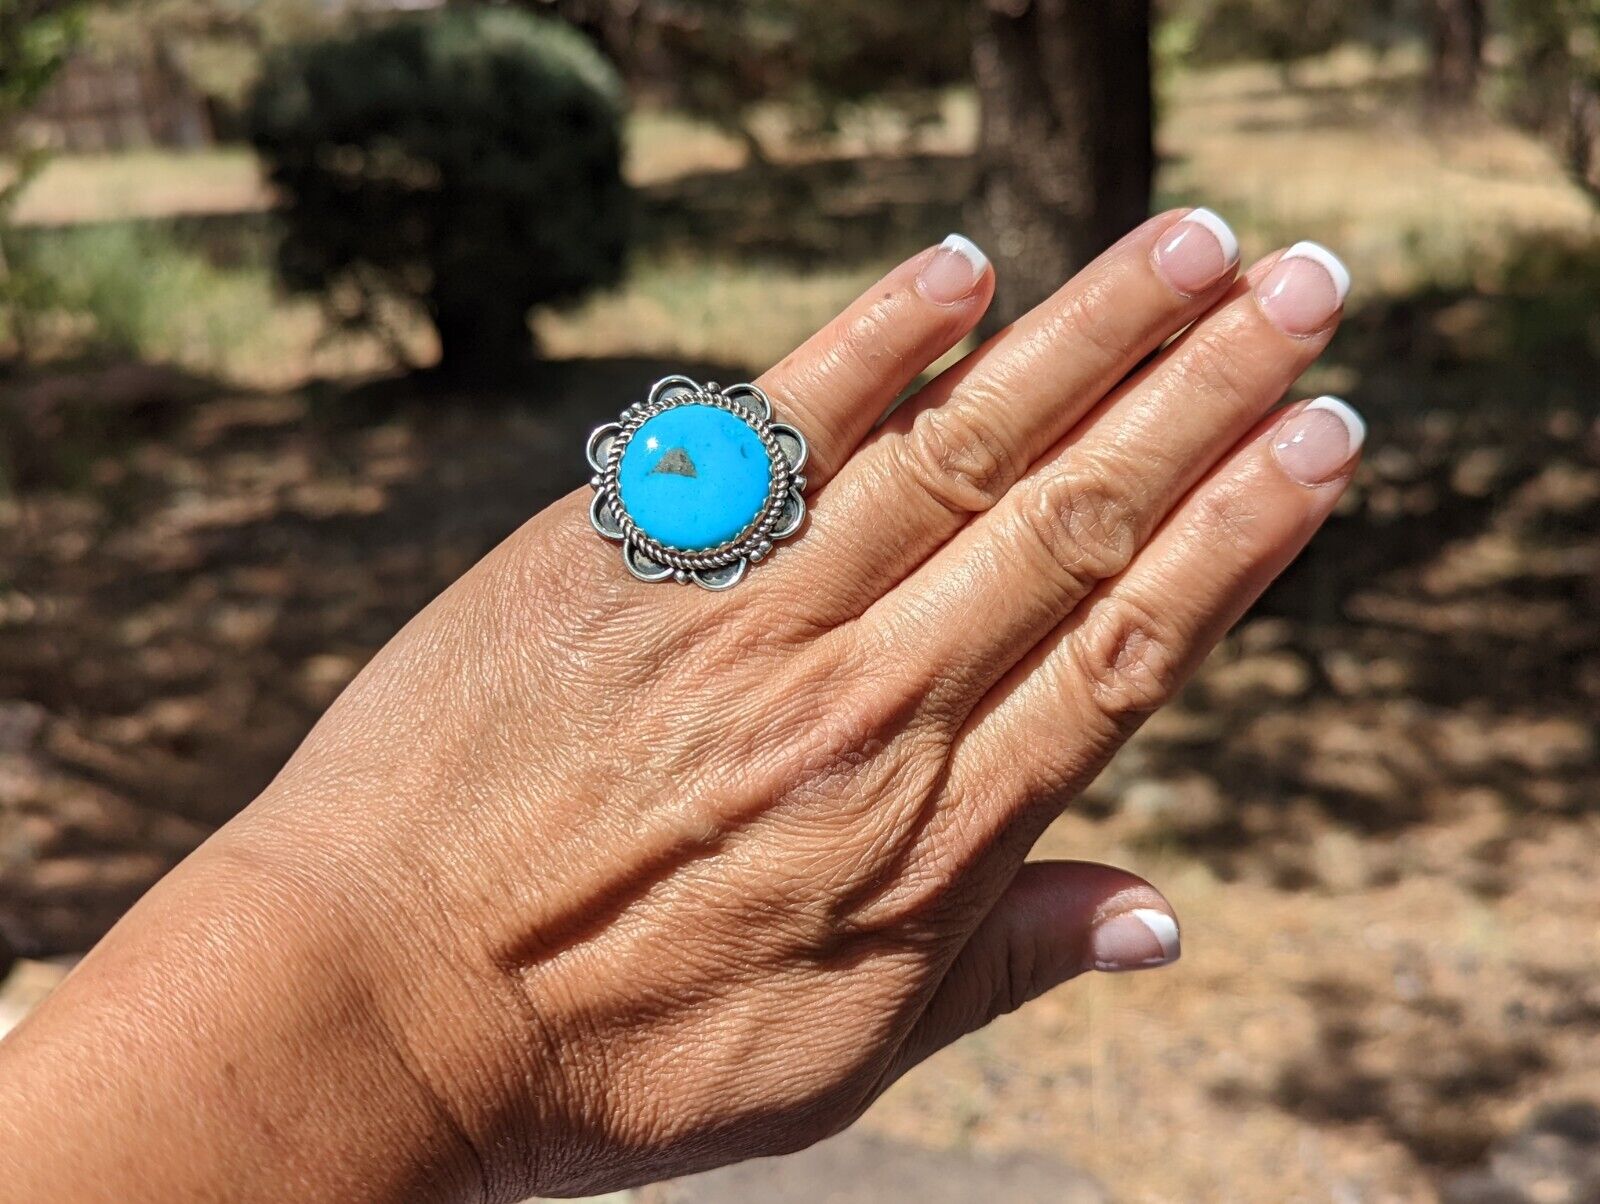 Navajo Floral Ring Kingman Turquoise Jewelry sz 5.5US Signed Hand Made Sterling